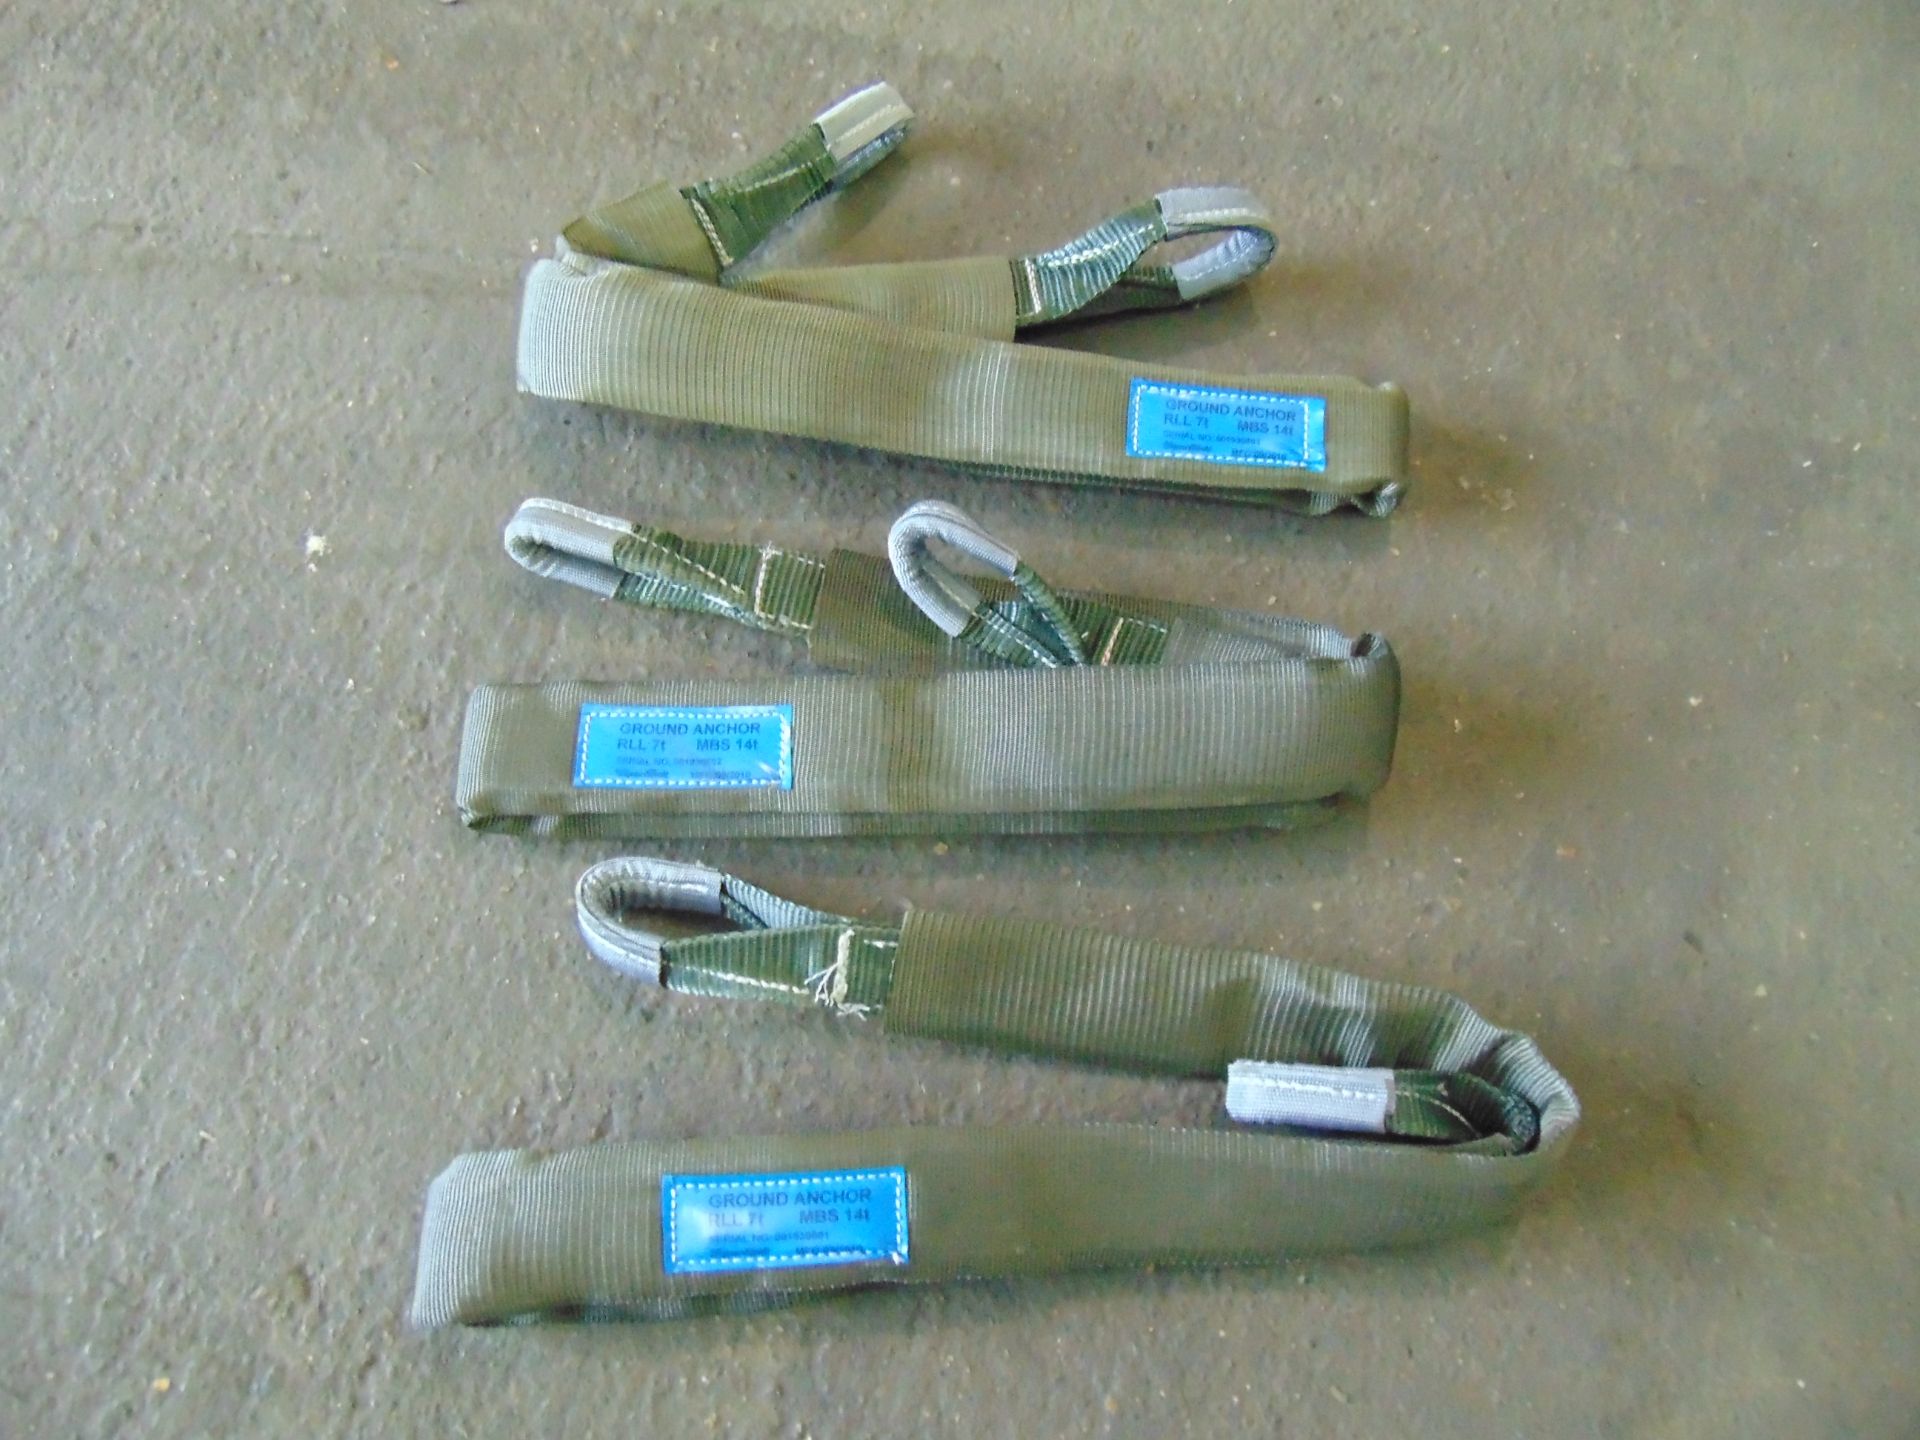 3 x Unissued SpanSet 14t Ground Anchor Straps as shown